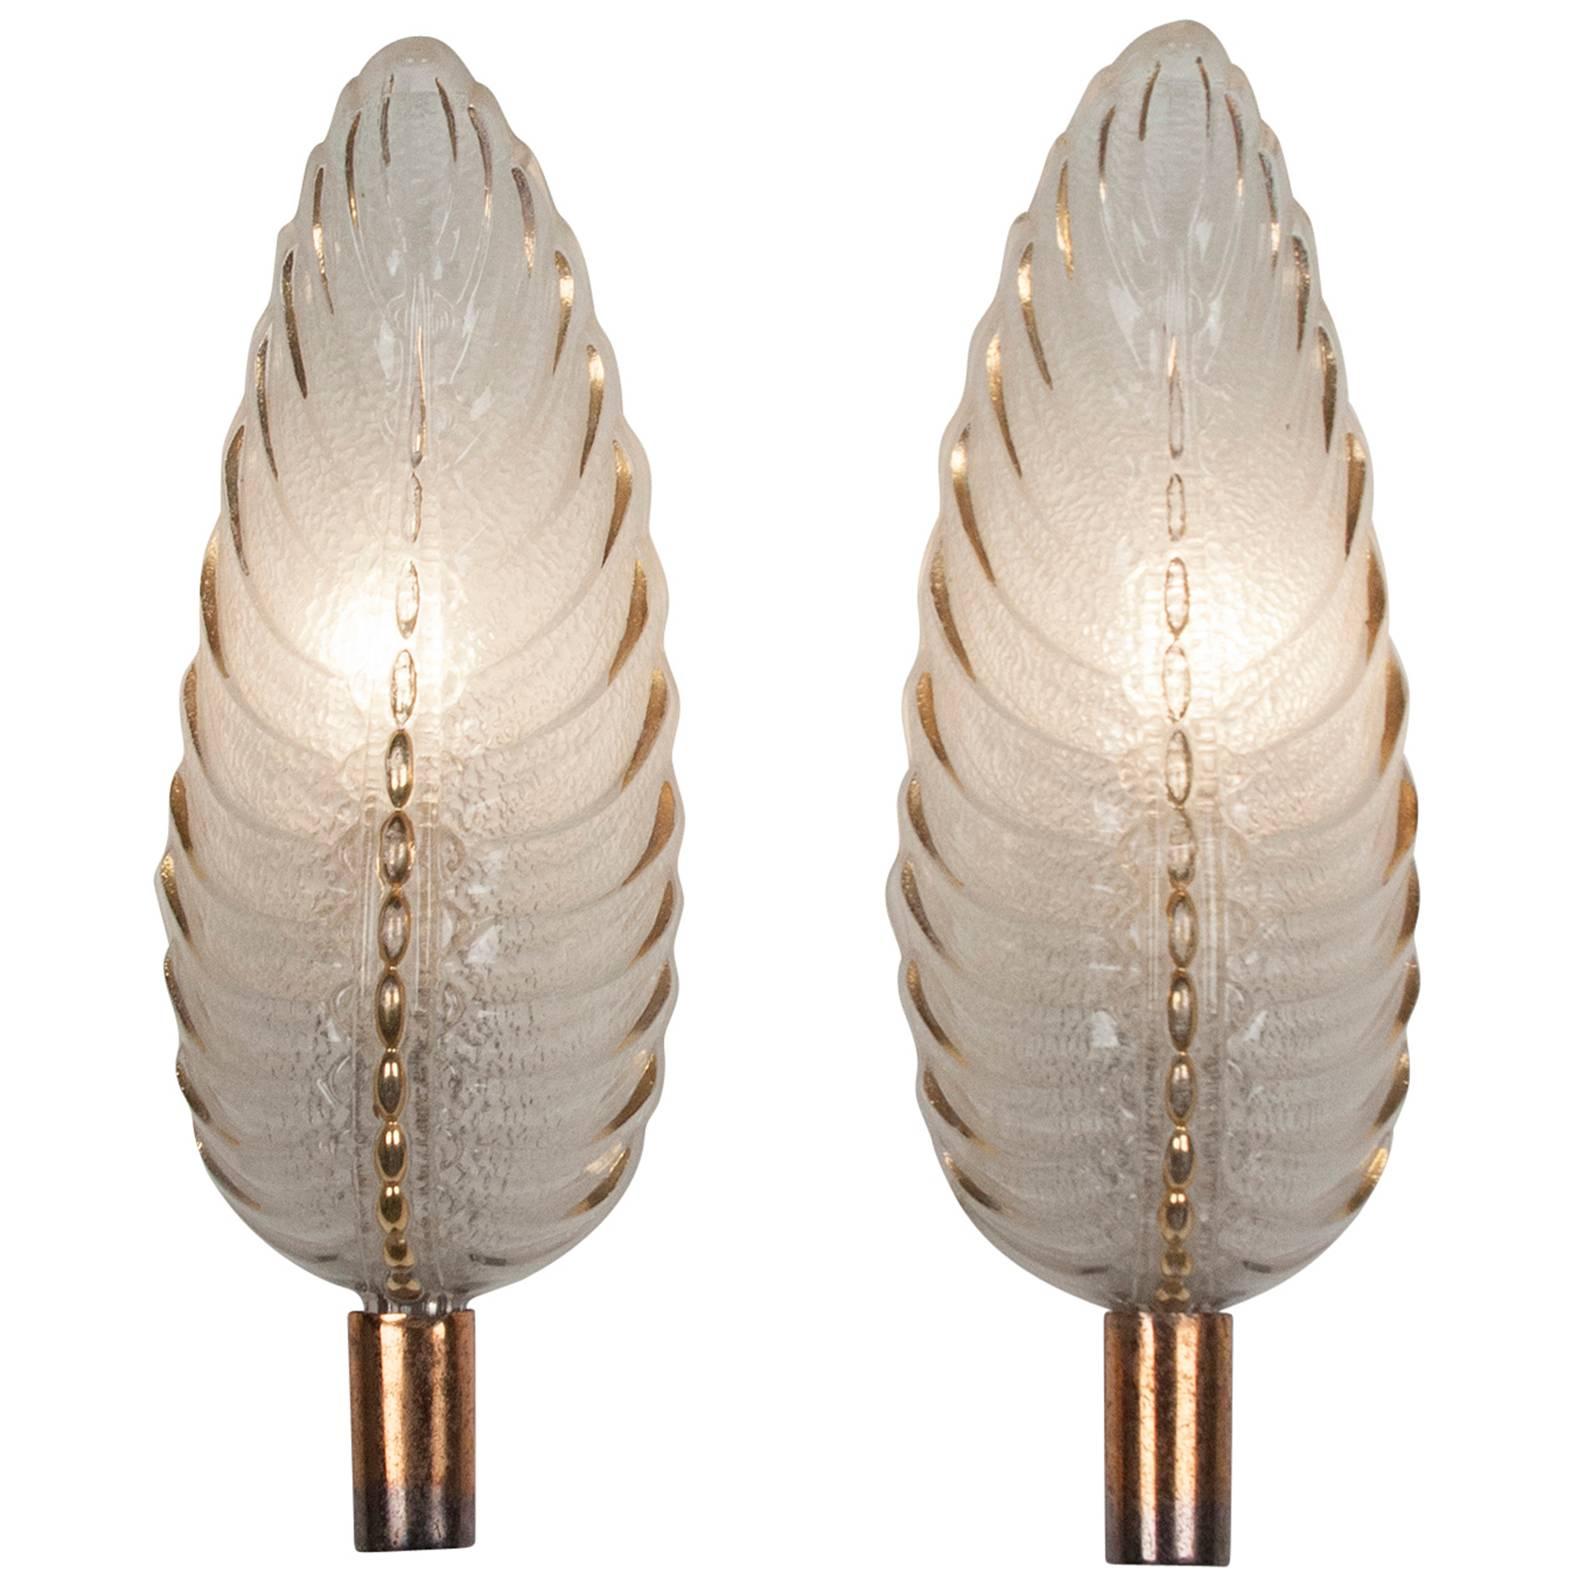 Pair of Ezan Leaf Sconces, French, 1940s For Sale